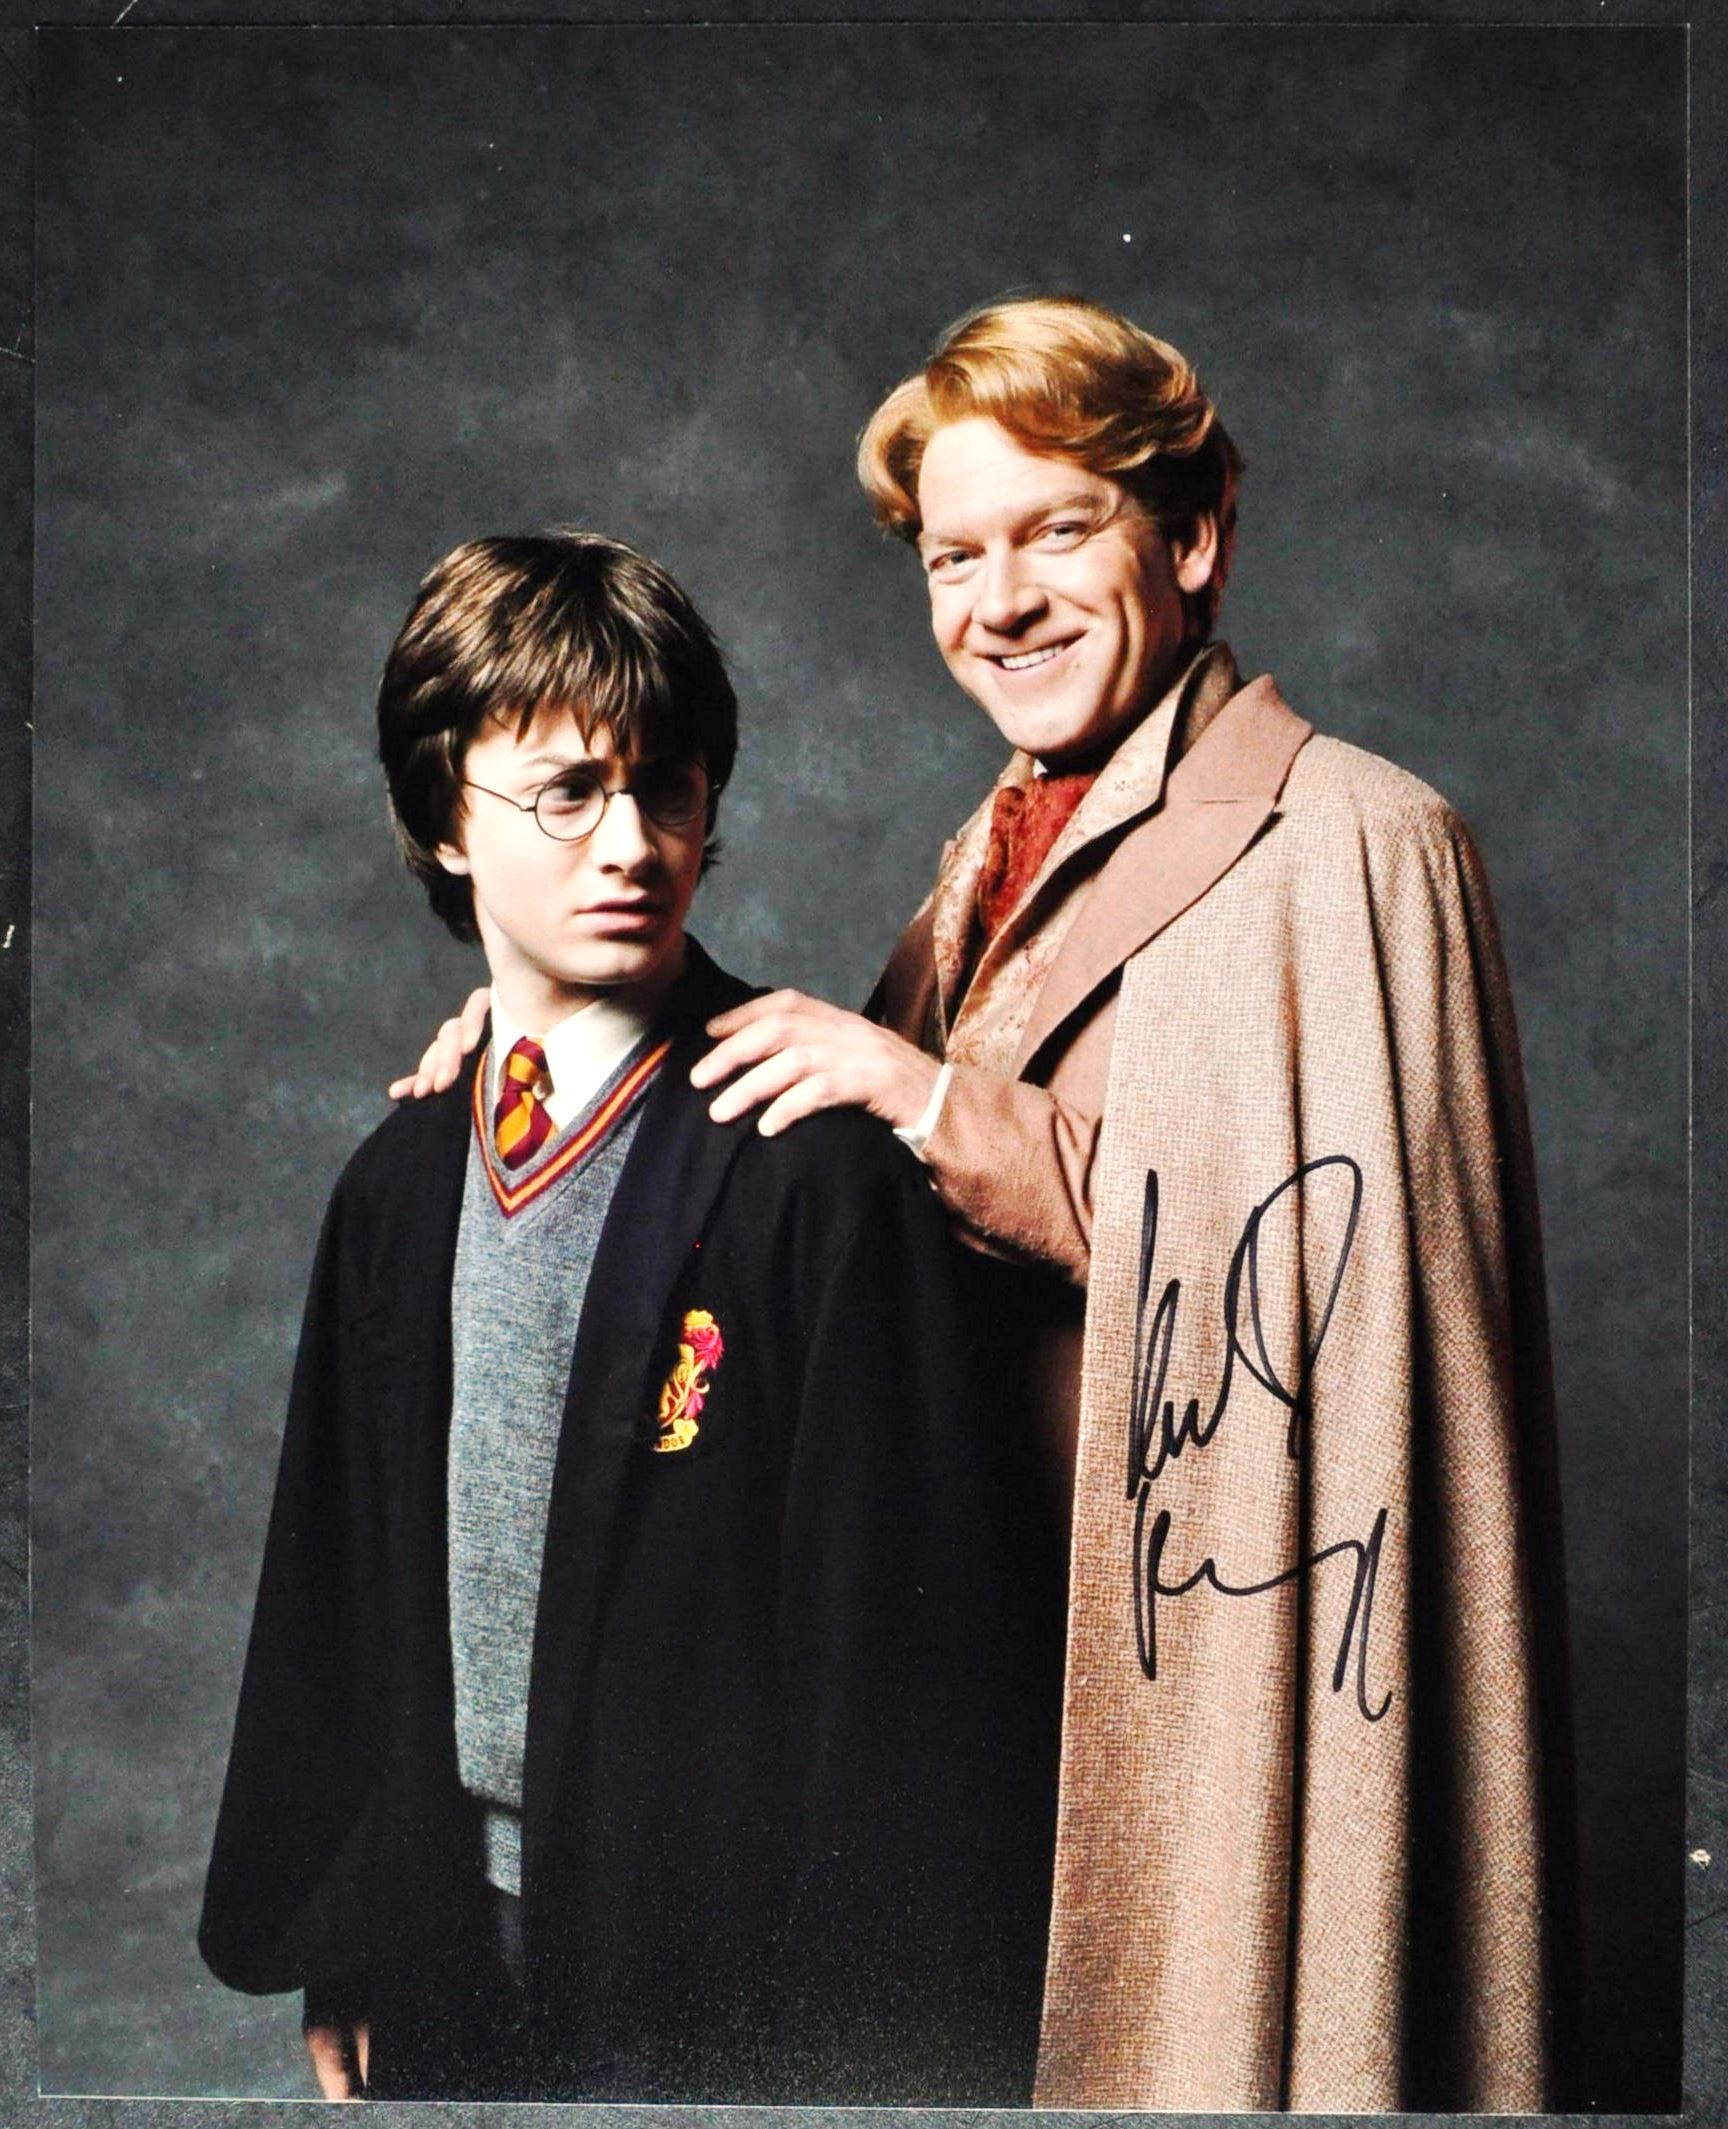 SIR KENNETH BRANAGH - HARRY POTTER - AUTOGRAPHED PHOTO - AFTAL